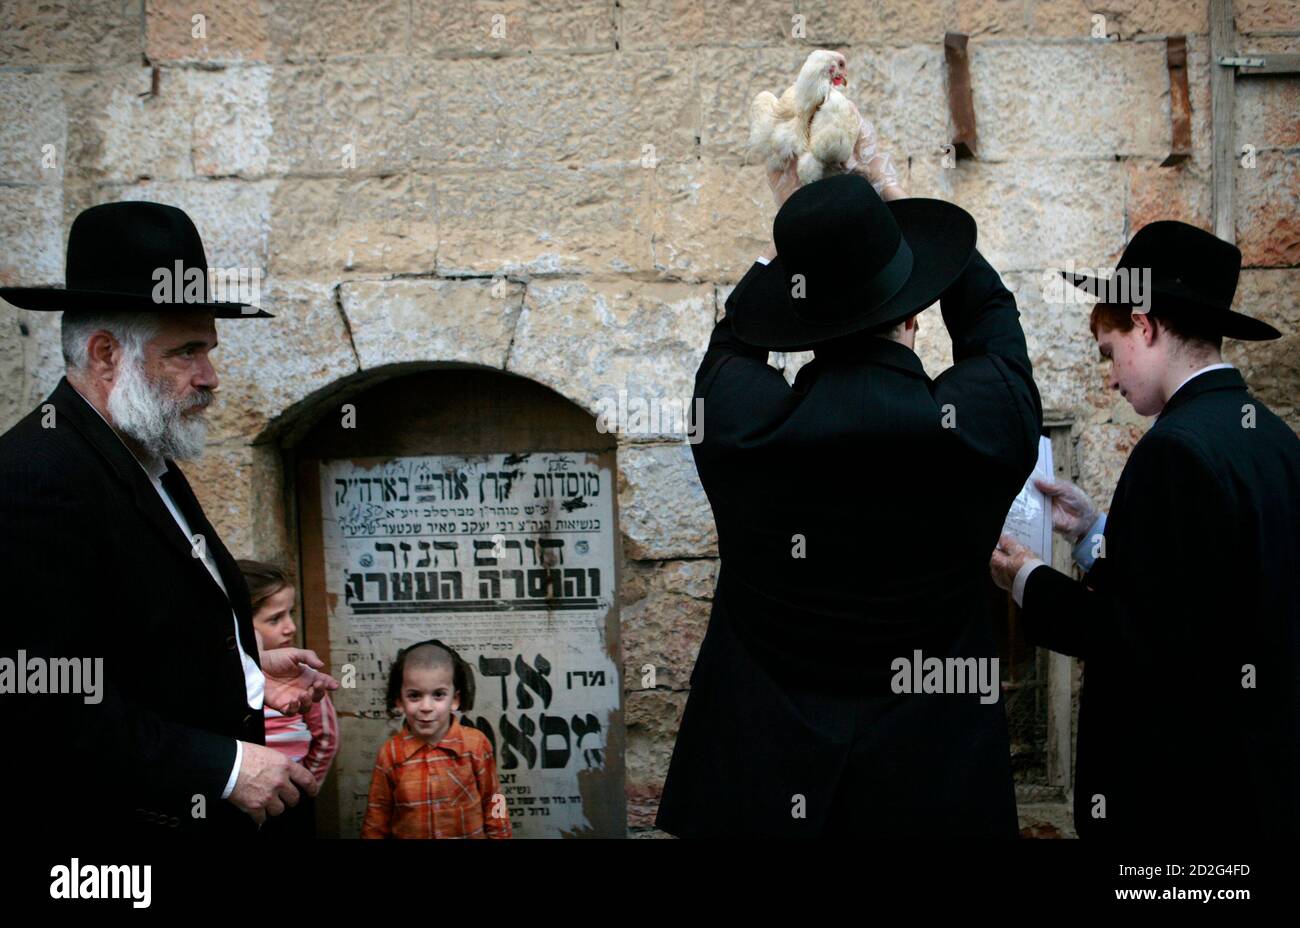 Ultra-Orthodox Jews swing a chicken over their heads during a Kaparot  ritual in Jerusalem September 18, 2007. Kaparot is an ancient custom  connected to the Jewish Day of Atonement, Yom Kippur, where